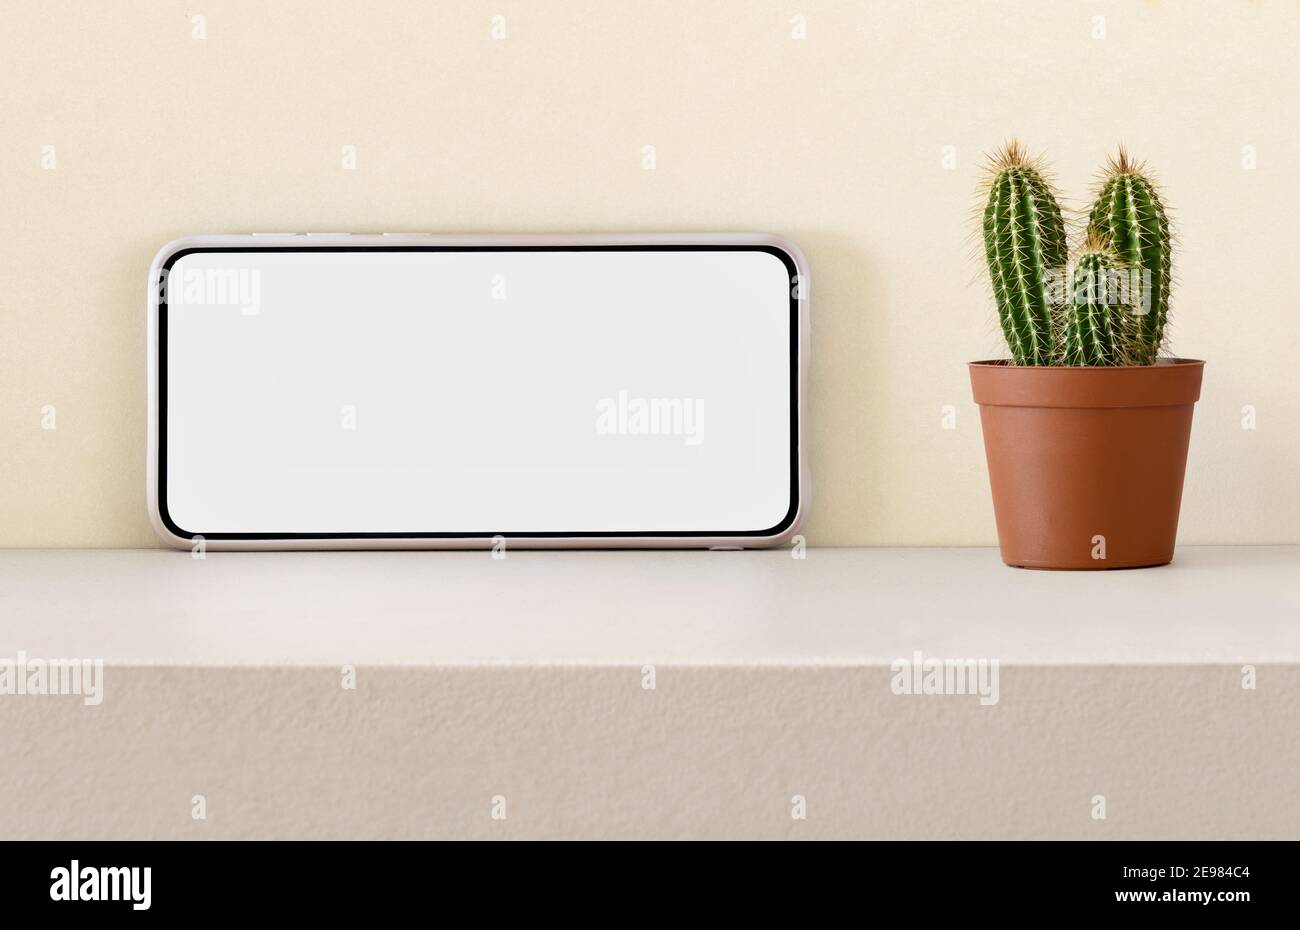 Modern mobile phone with white blank screen placed near potted cactus plant on shelf against light wall Stock Photo